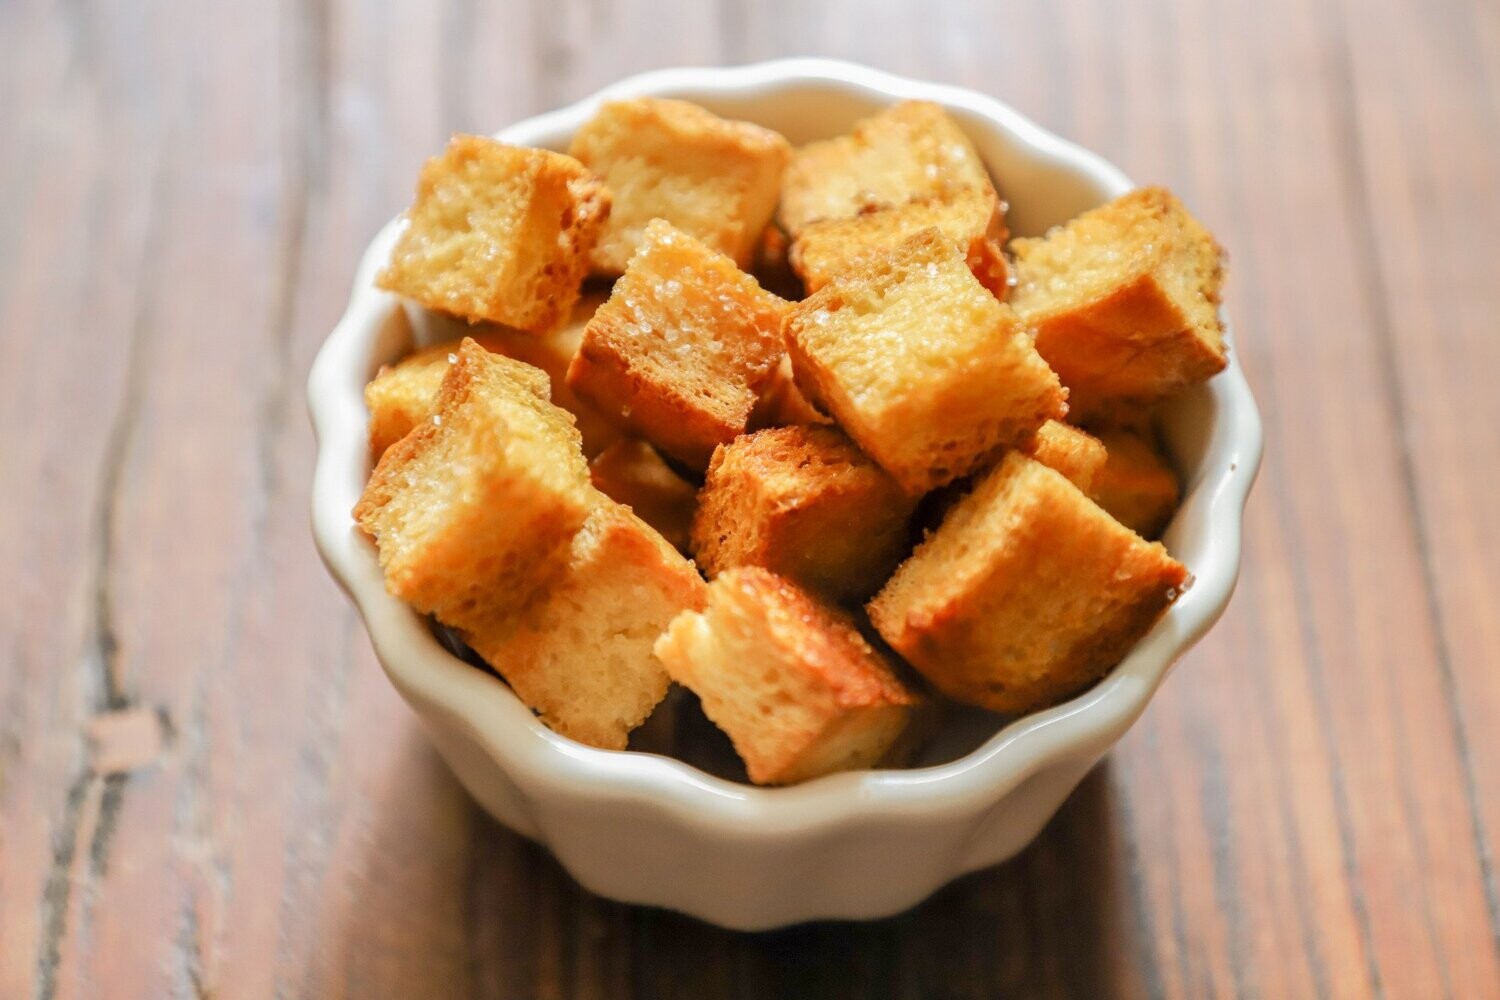 Home Made Croutons